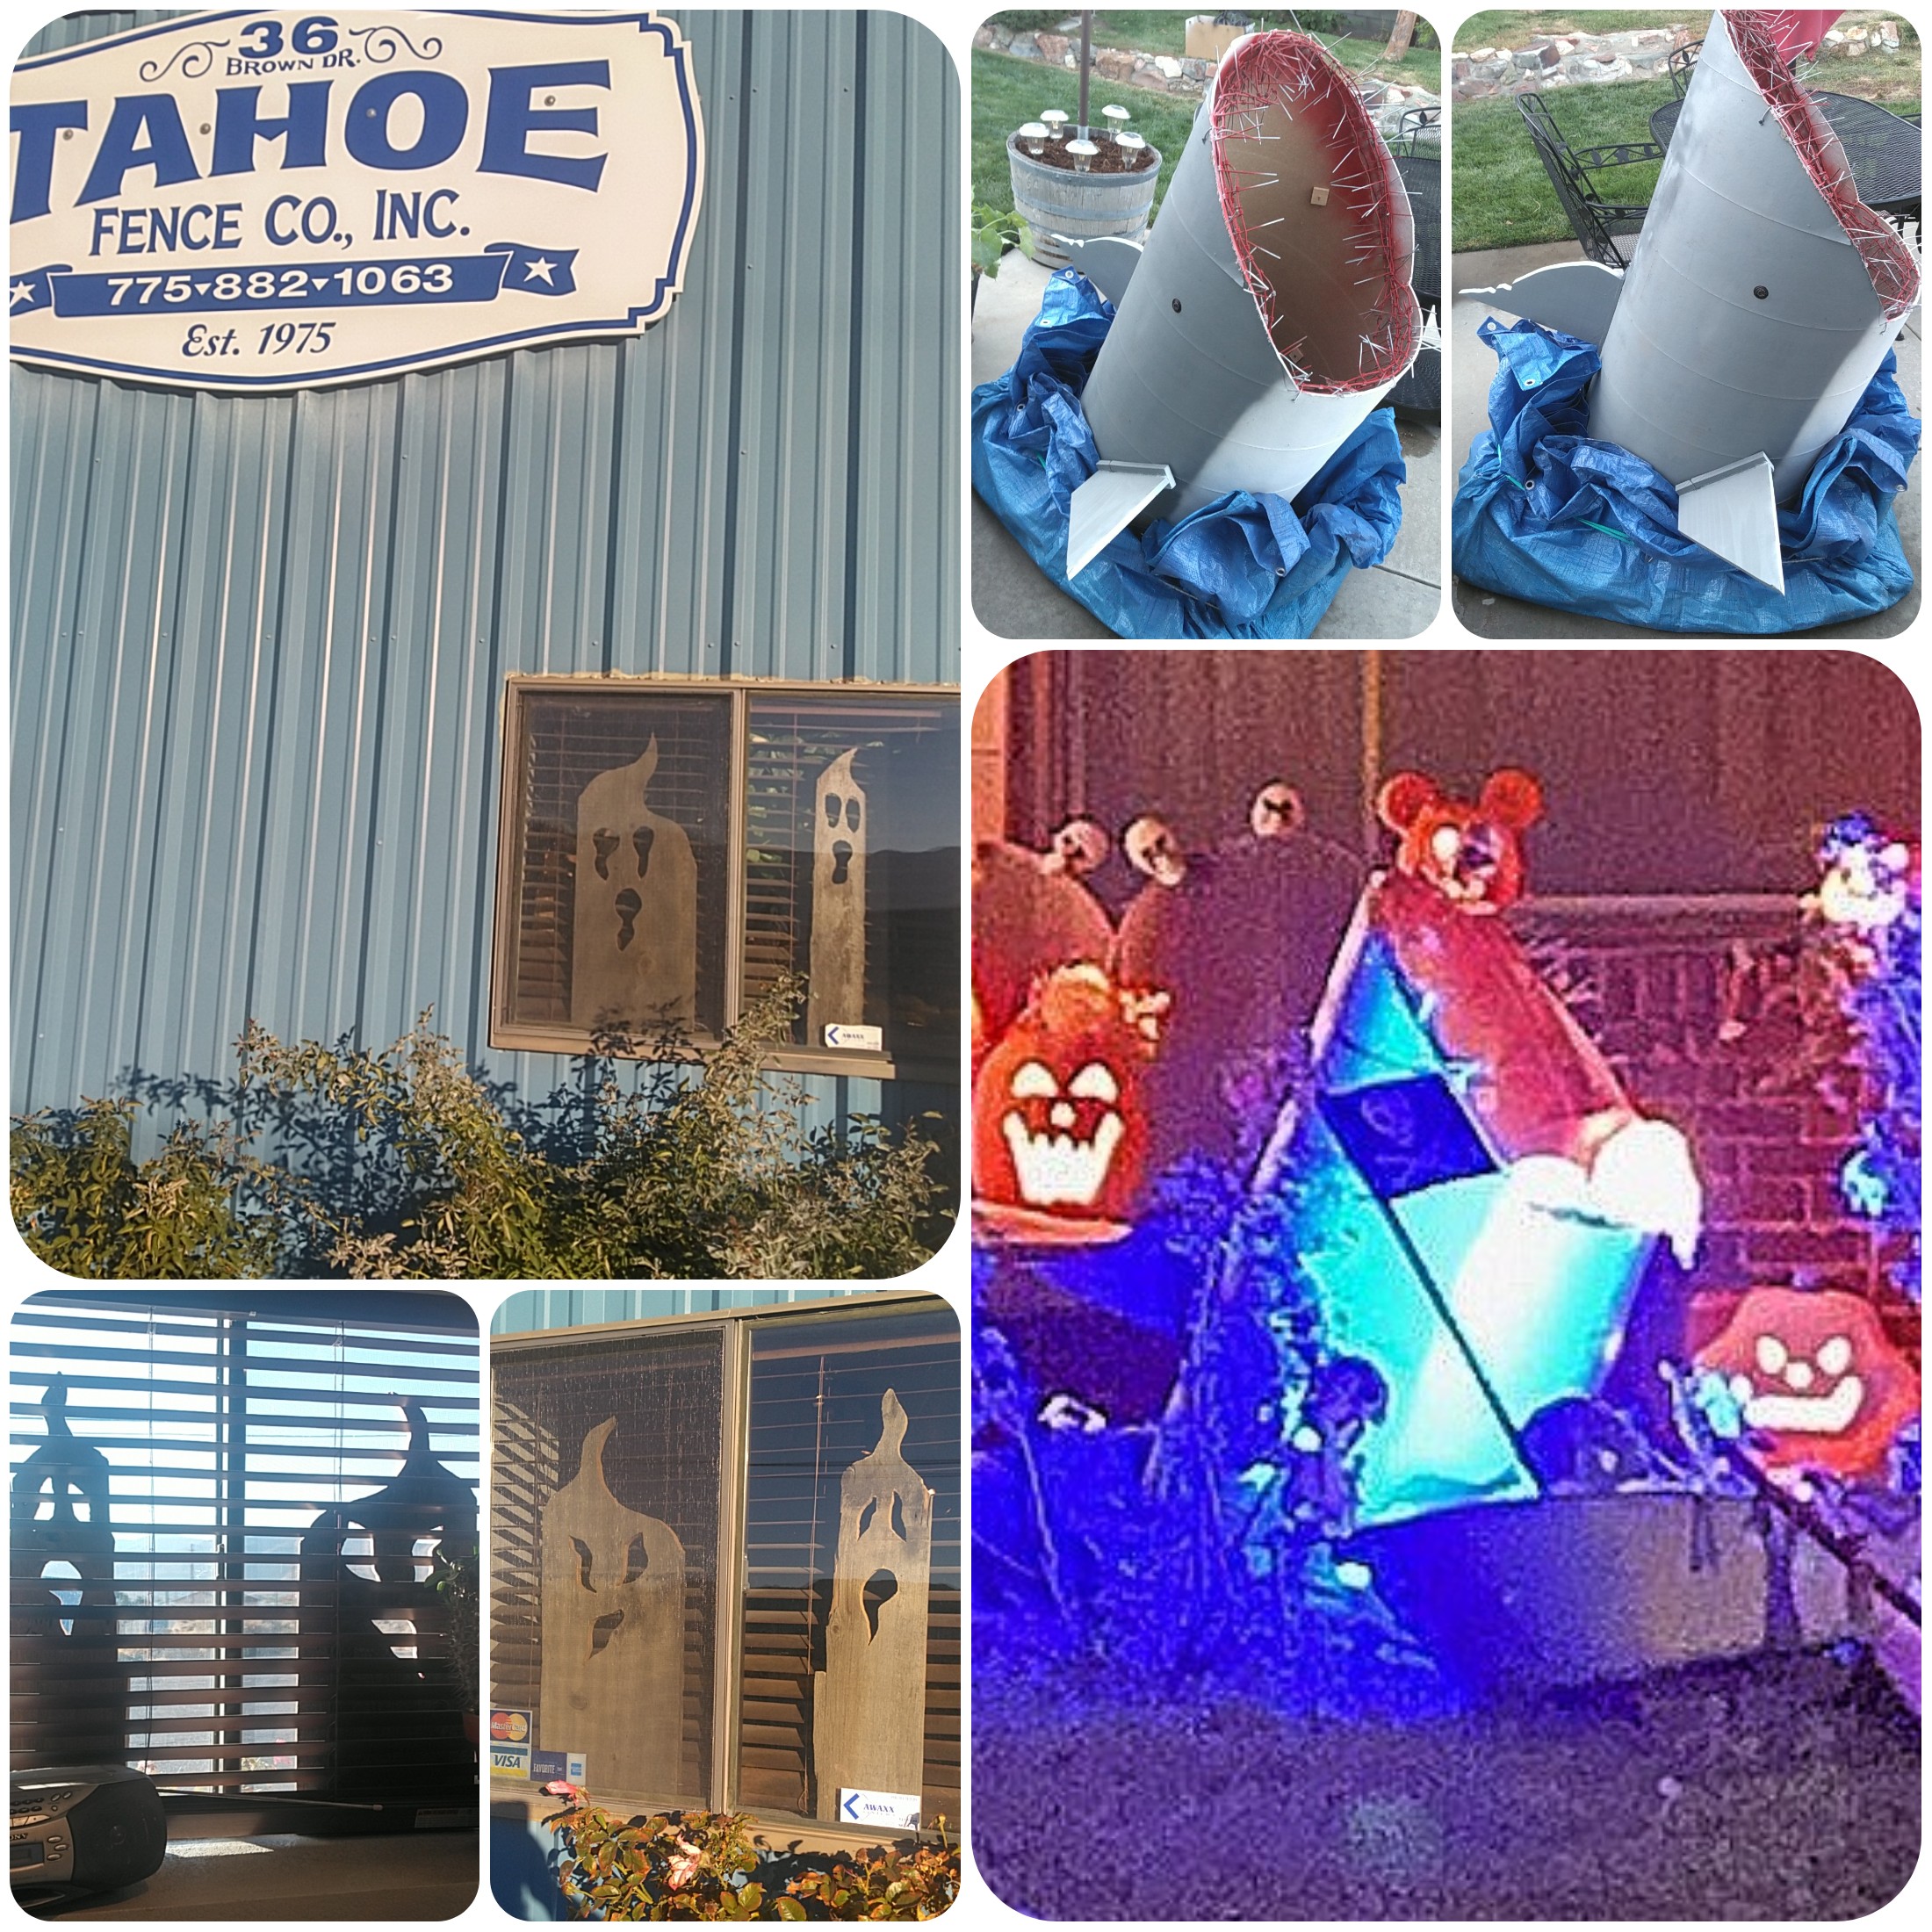 It's getting close to Halloween which means the start of the holidays. While Tahoe's still busy with work, we took a moment to get into the spirit of the season.